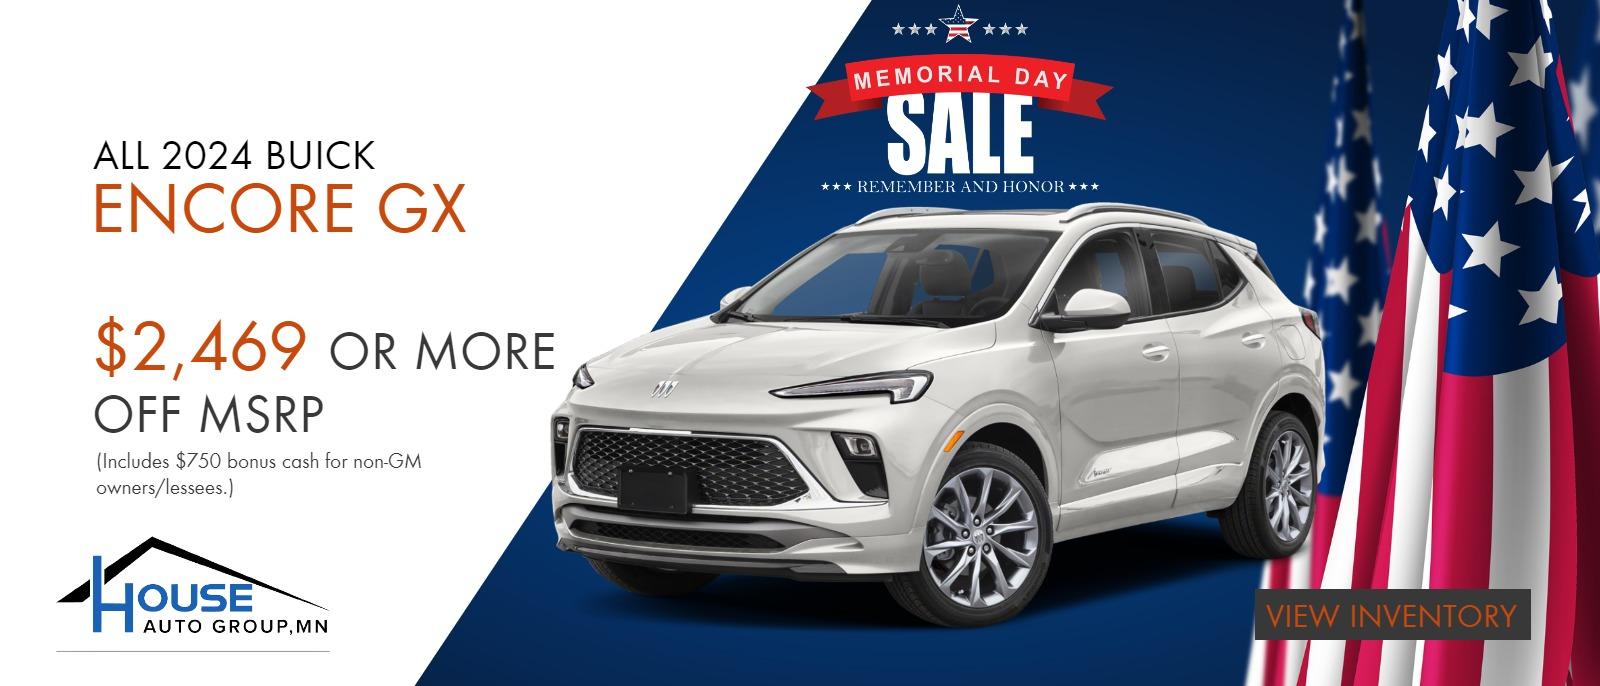 ALL 2024 Buick Encore GX SUVs - $2,469 Or More Off MSRP! (Includes $750 bonus cash for non-GM owners/lessees.)